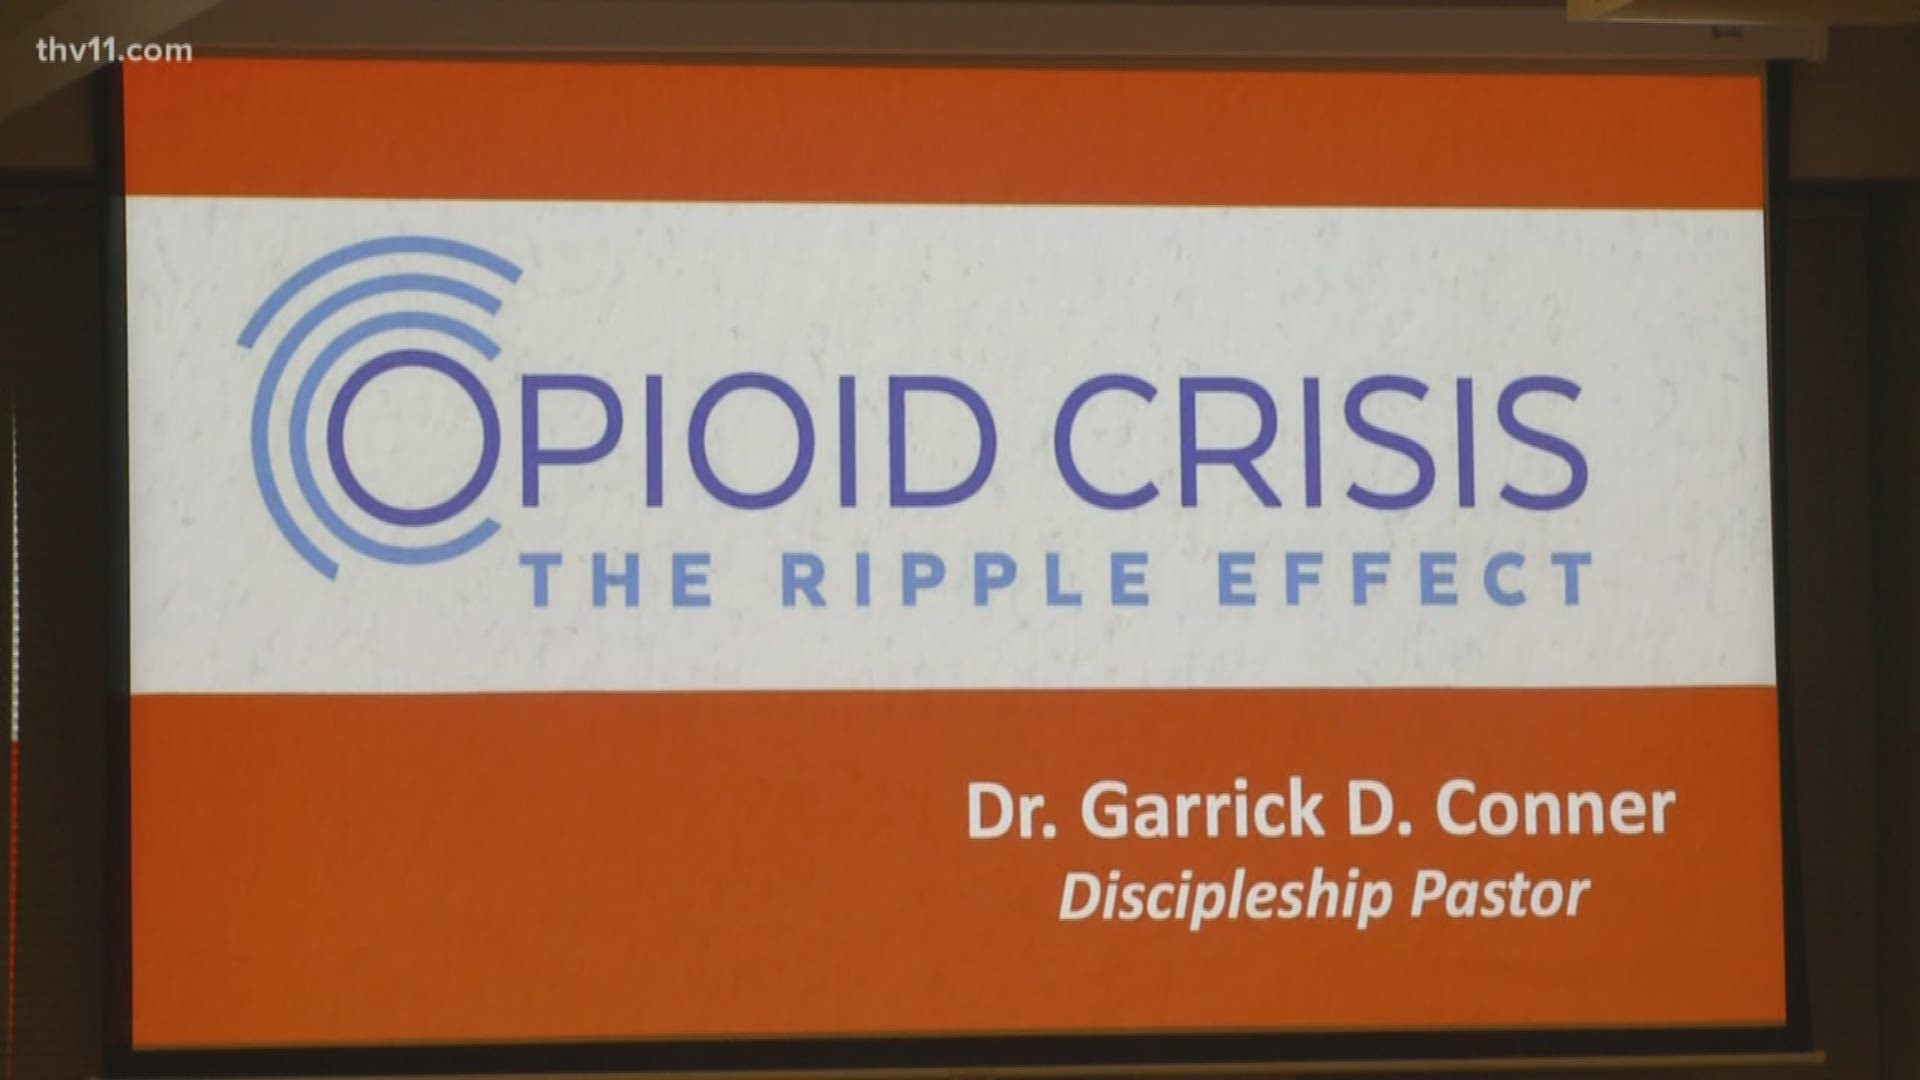 The event brought people from a wide range of backgrounds to talk about the effects of the opioid epidemic in Arkansas.